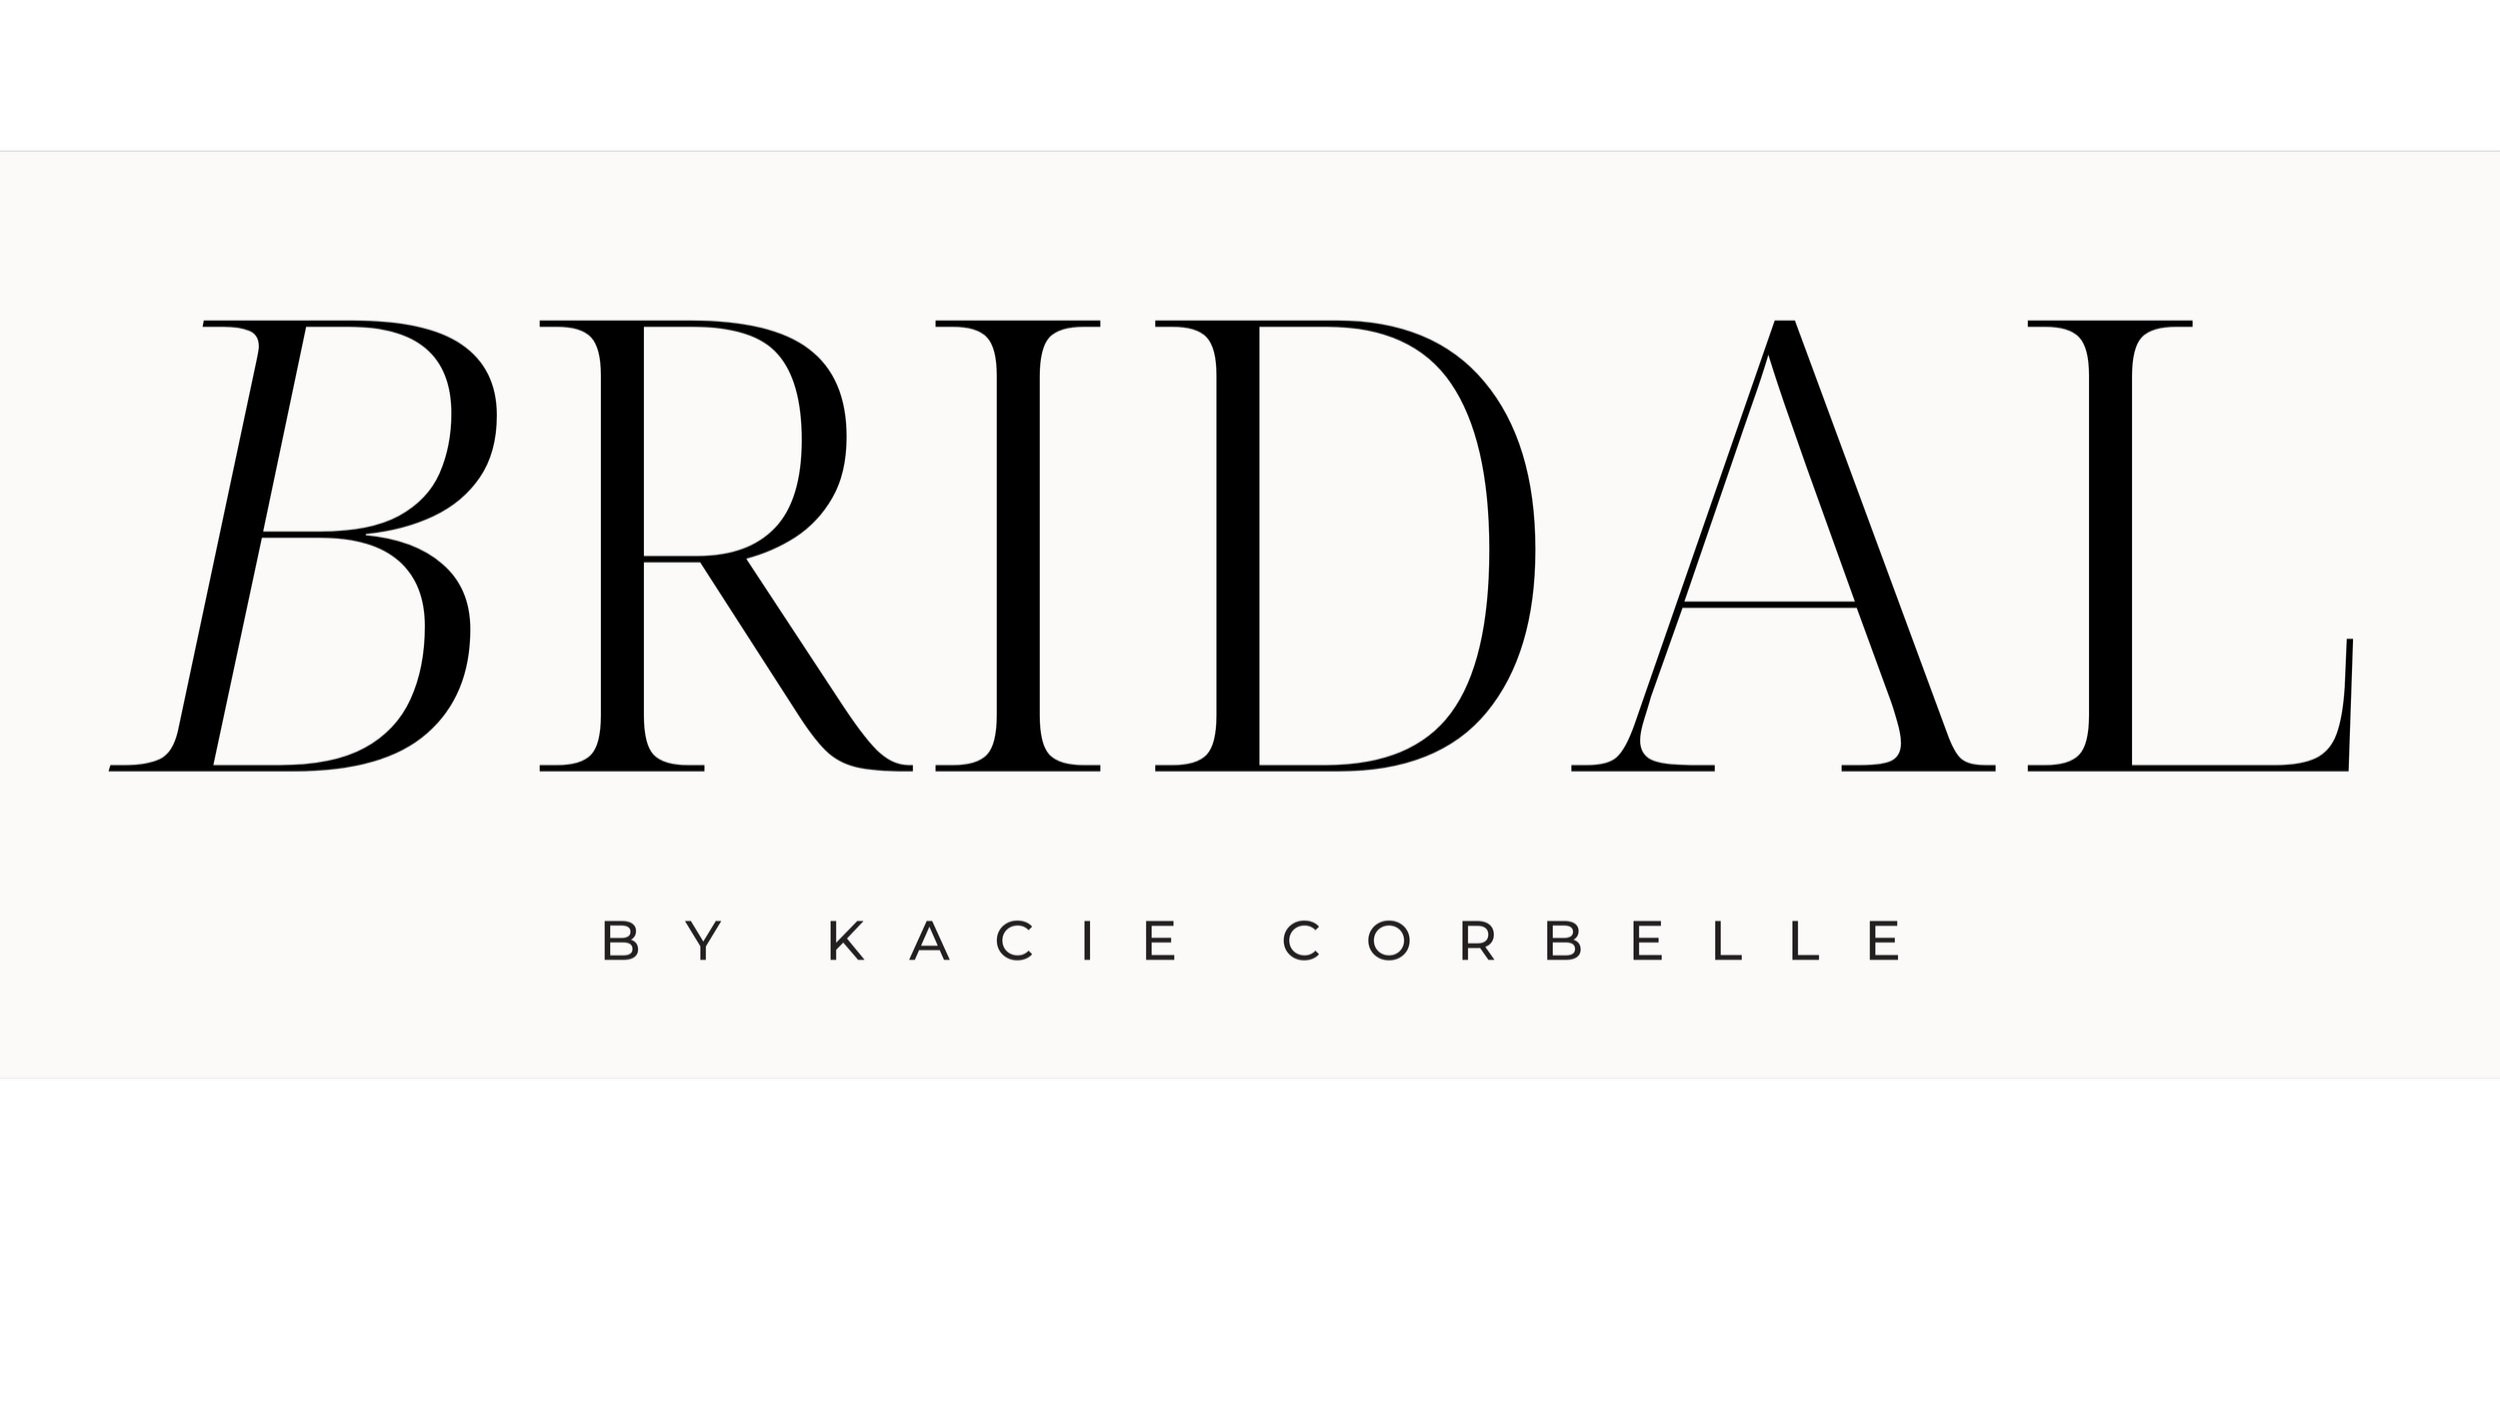 Bridal makeup and hair by Kacie Corbelle